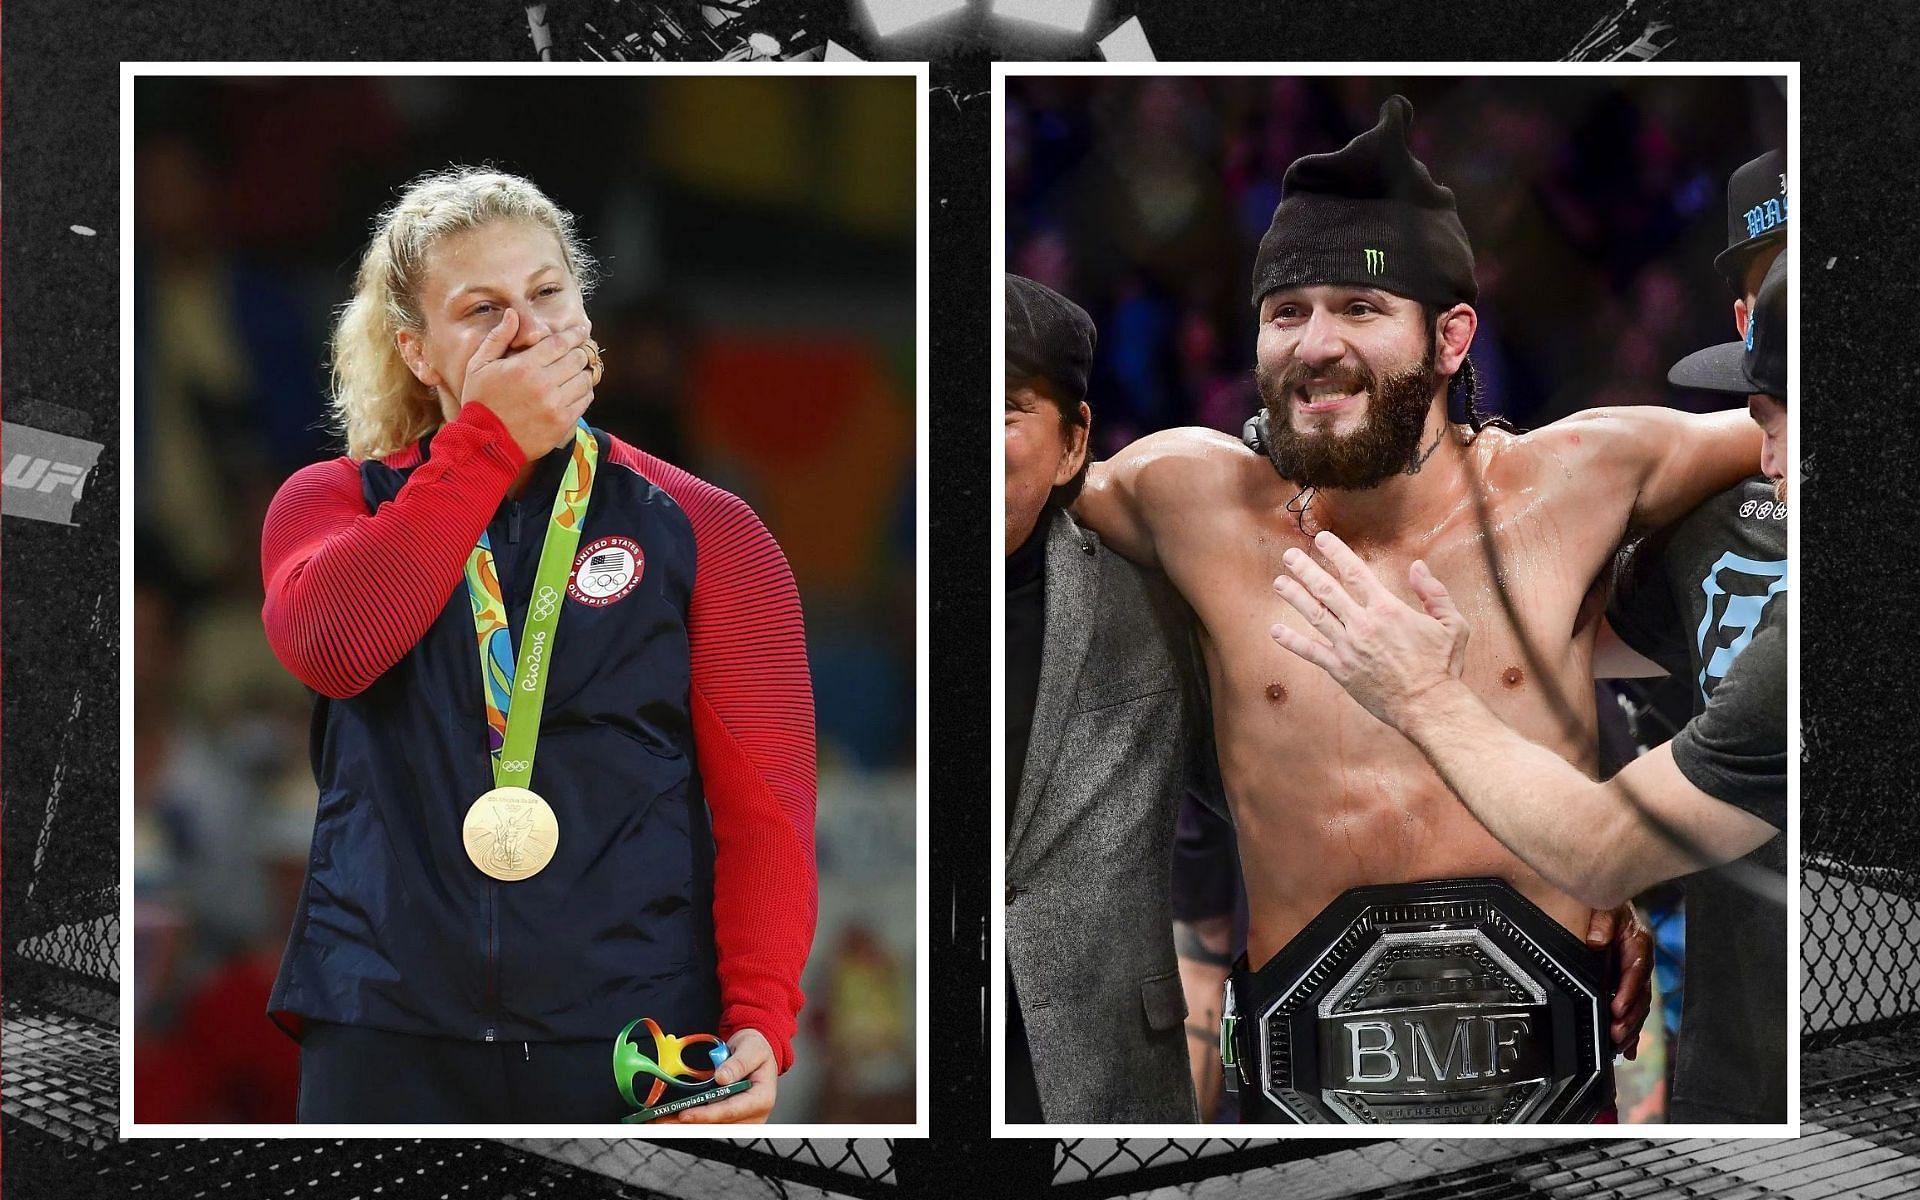 When Jorge Masvidal (right) discussed Kayla Harrison (left). [Image courtesy: Getty Images]